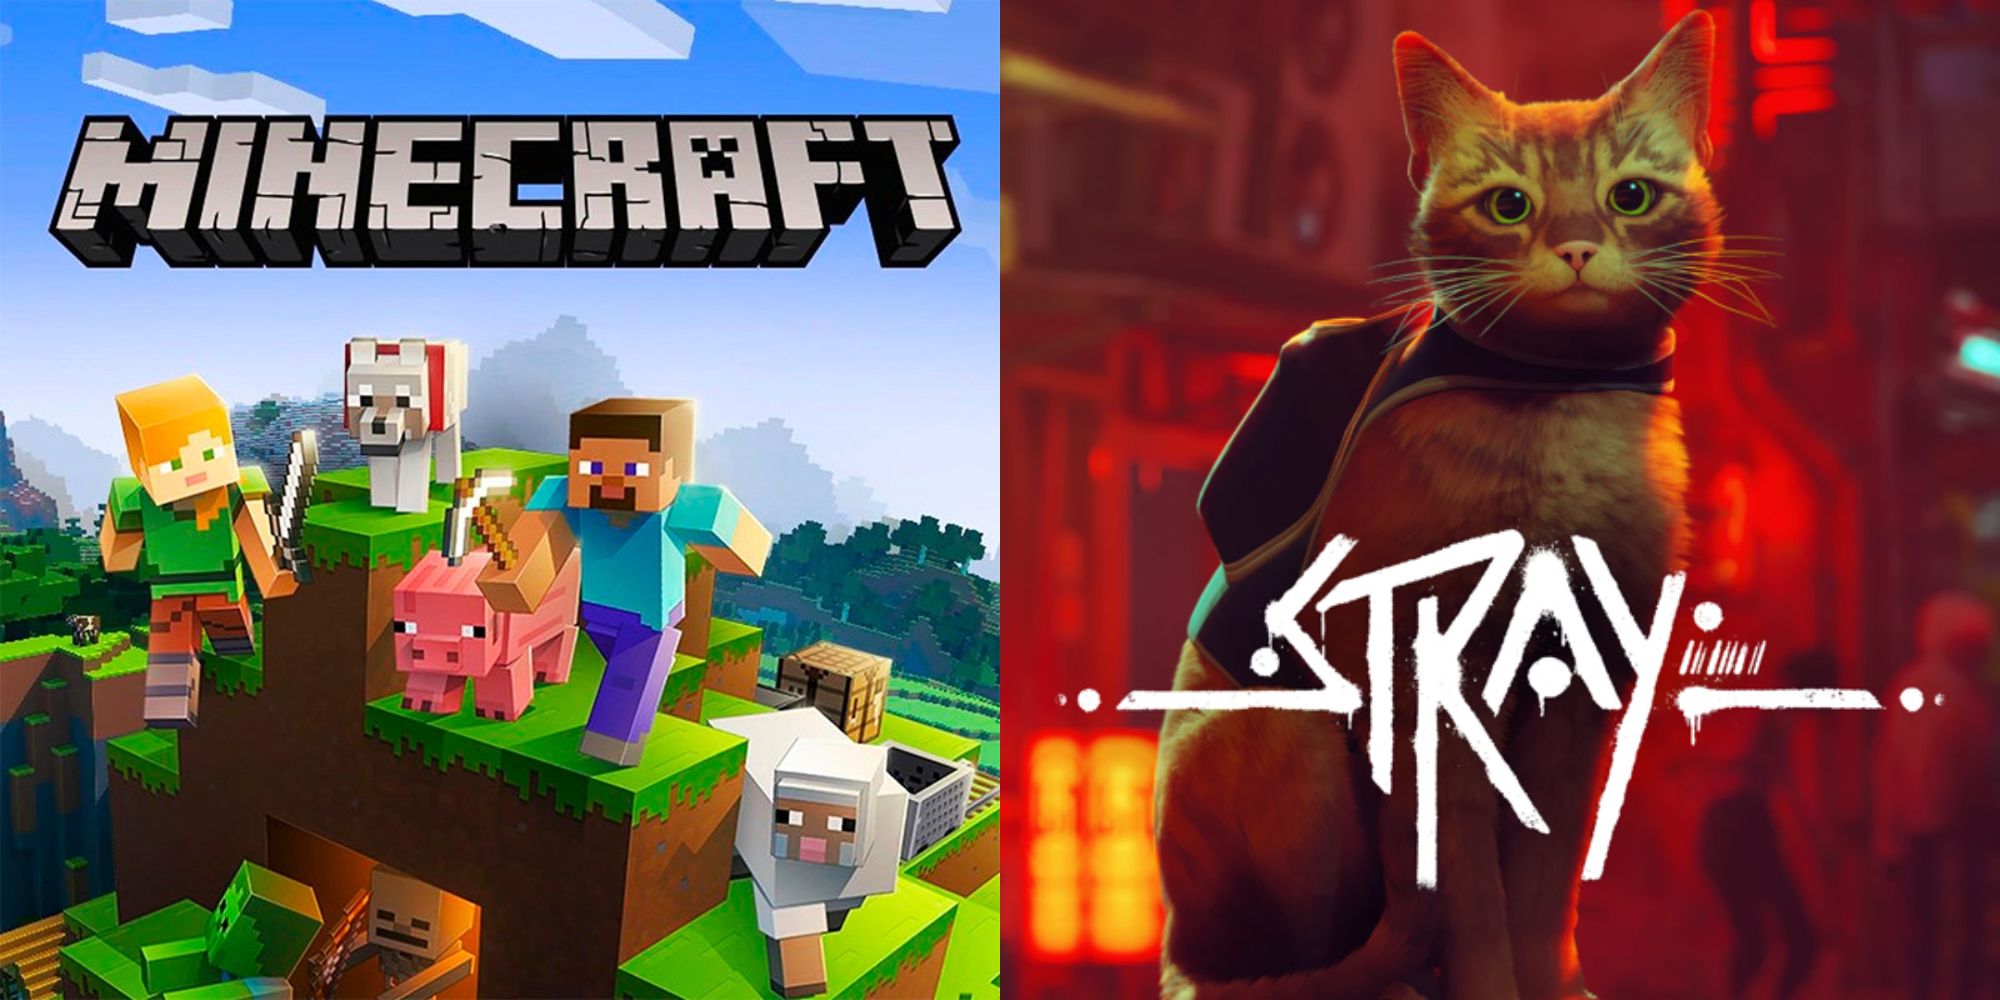 Split image showing covers for the games Minecraft and Stray.